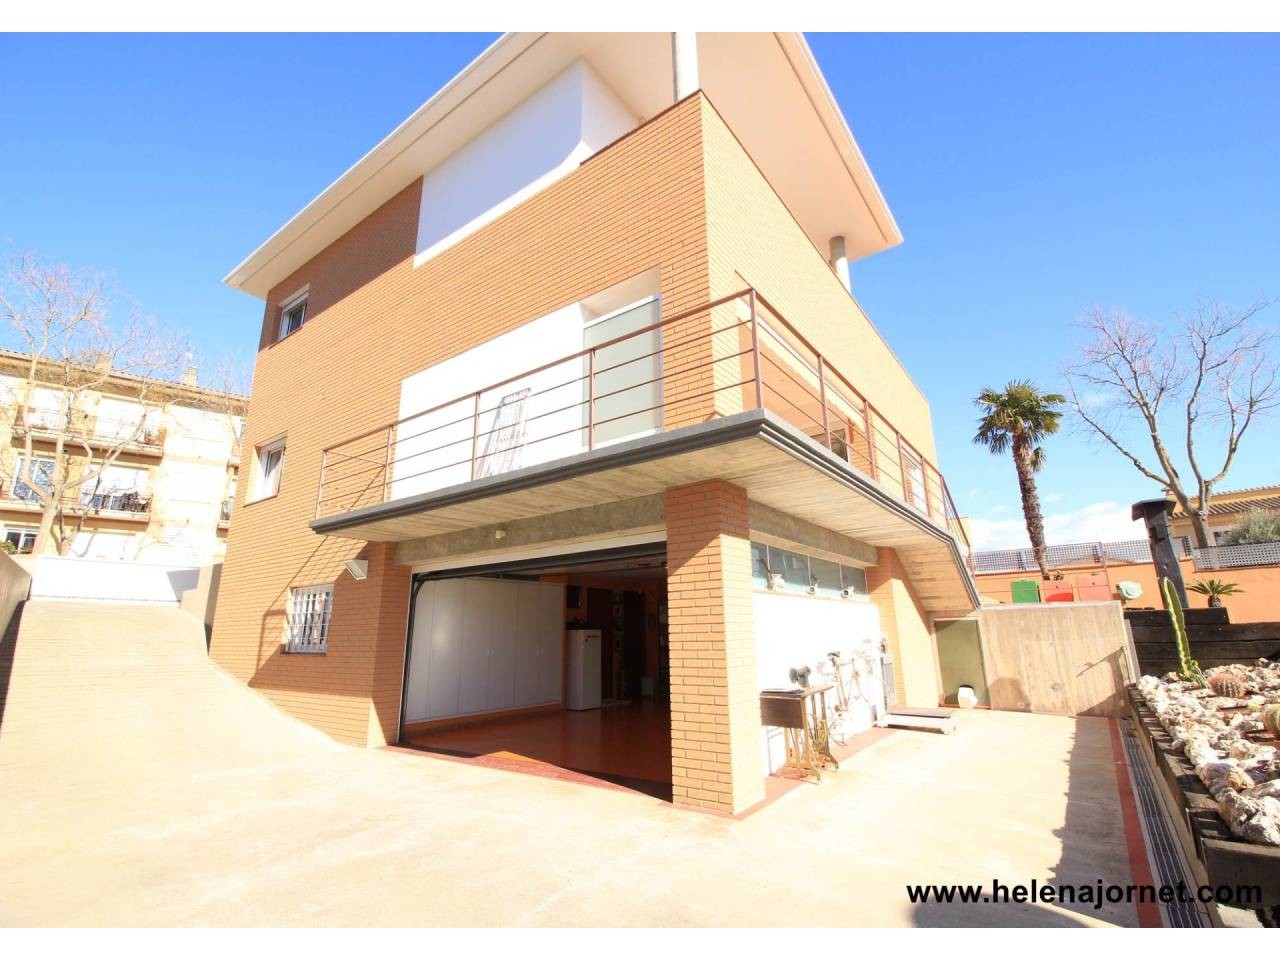 House for sale in Castell d'Aro - 574